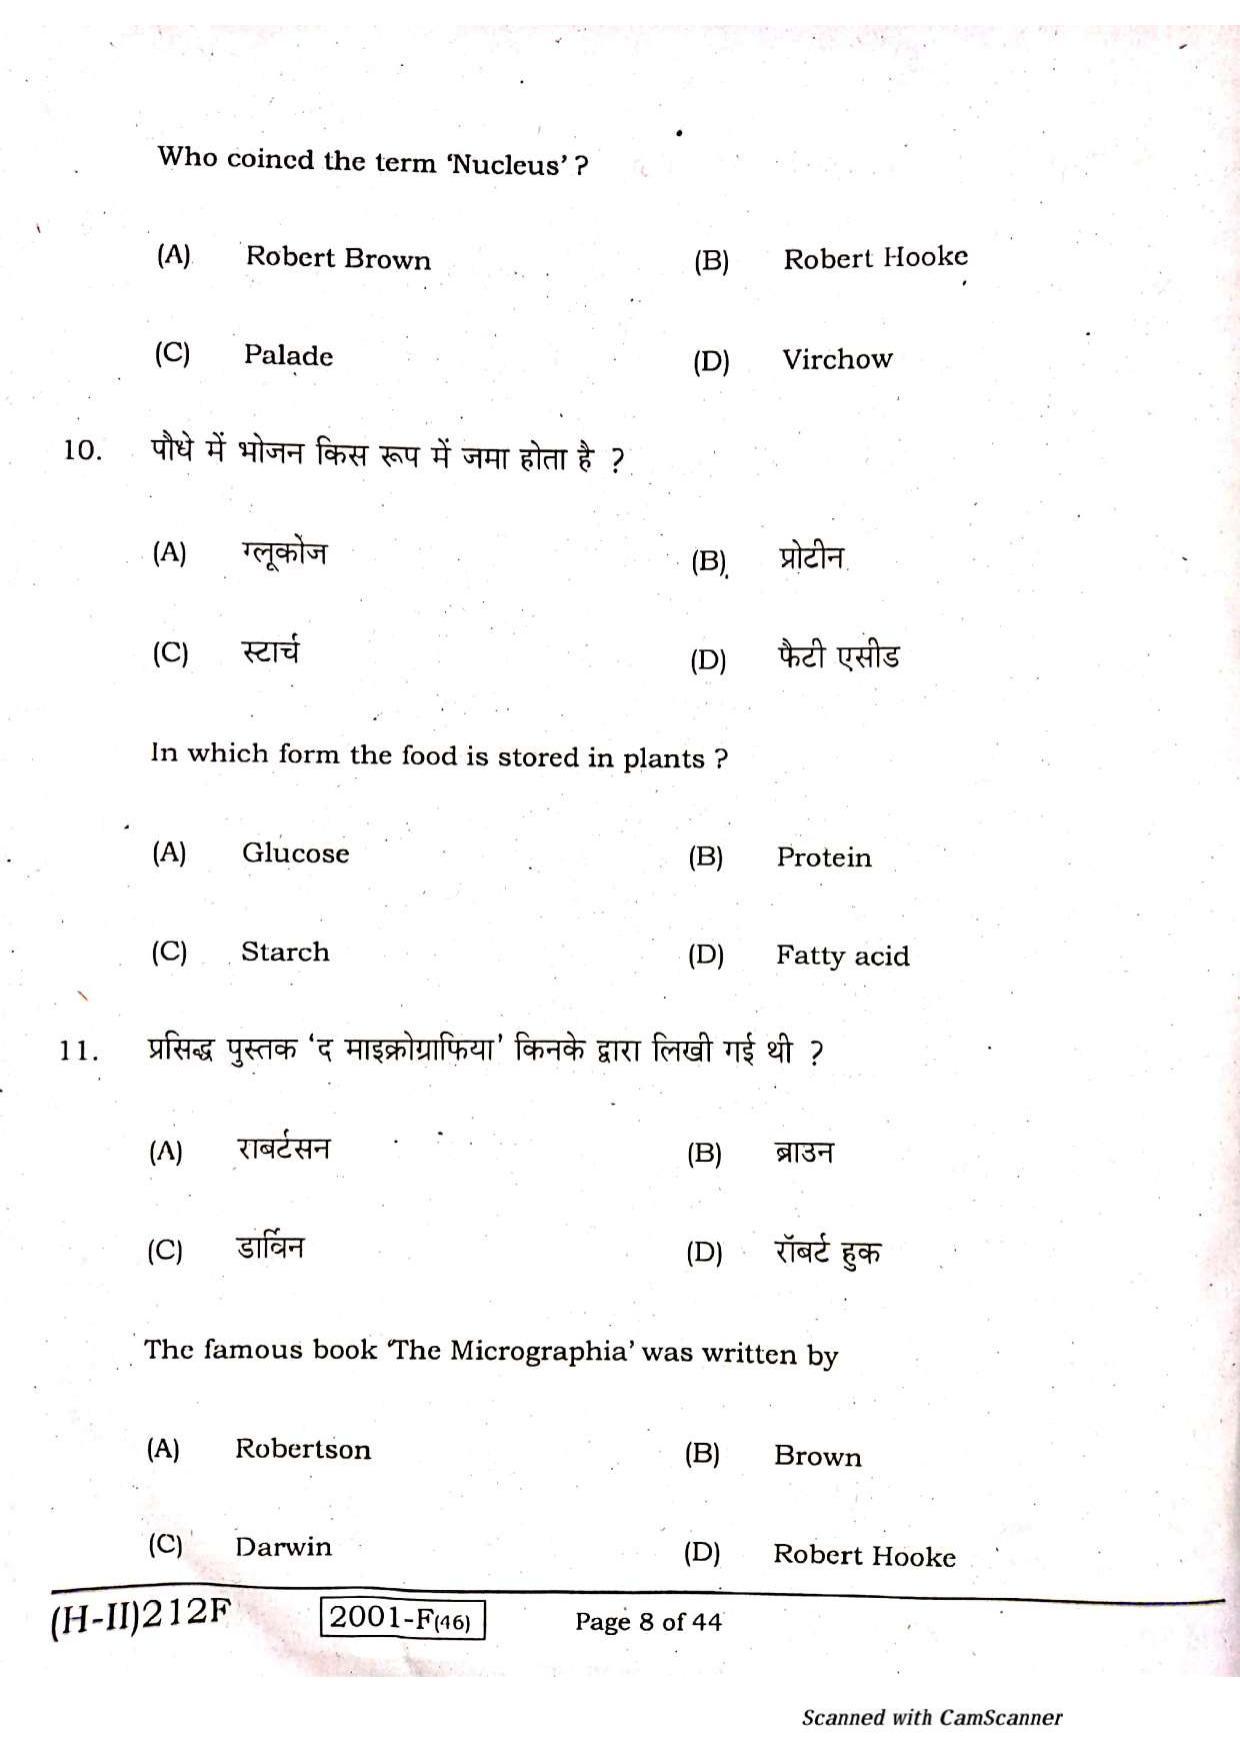 Bihar Board Class 10 Science 2021 (2nd Sitting) Question Paper - Page 6